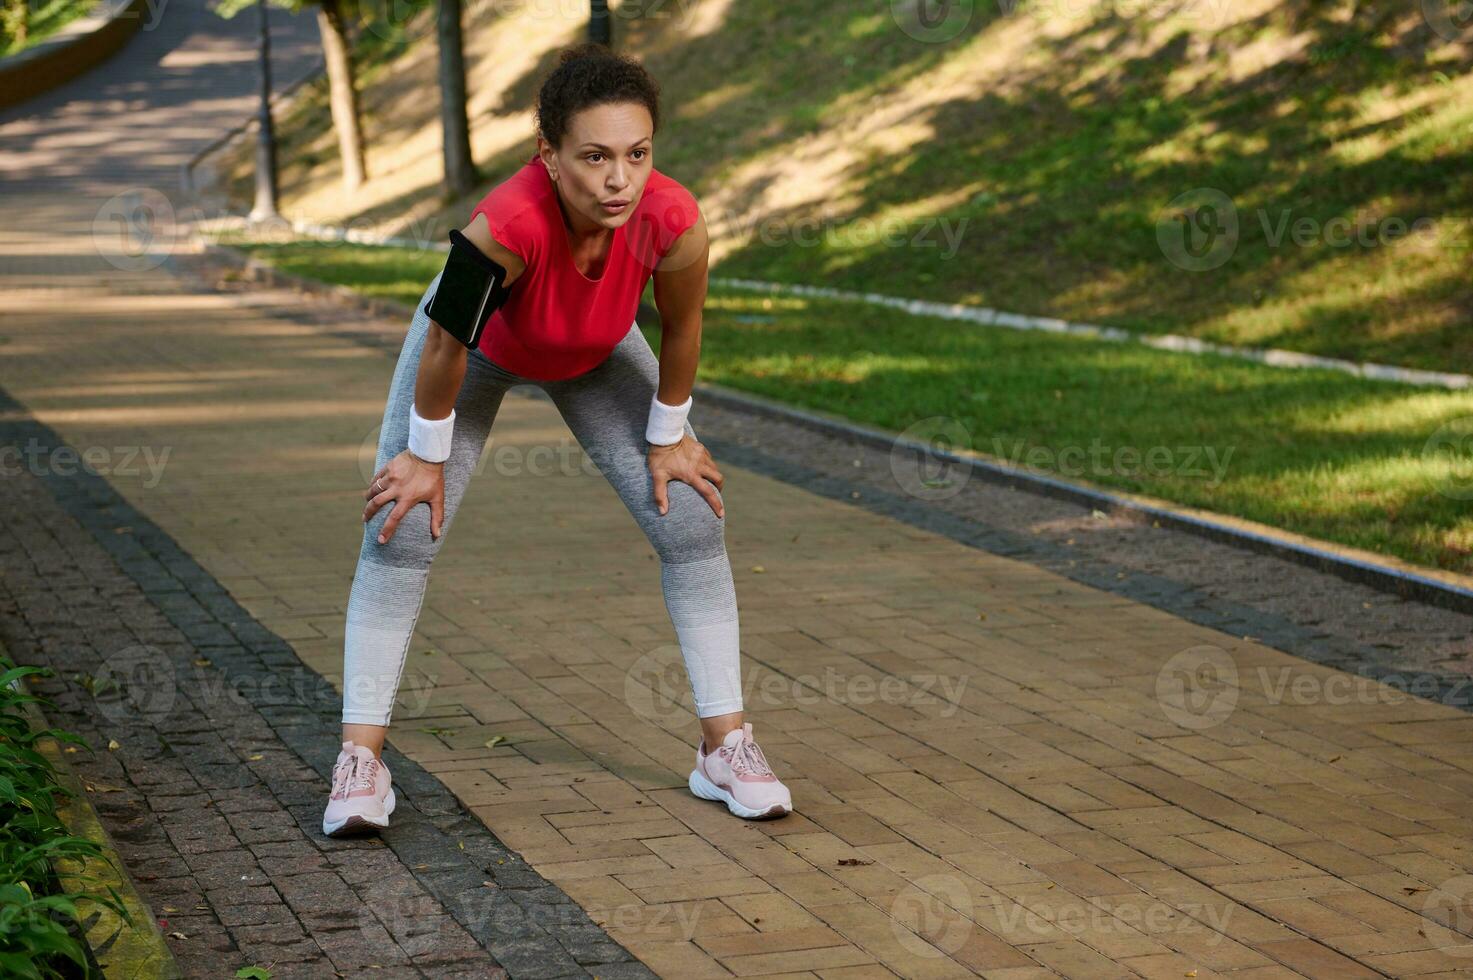 Female runner, Latin American sportswoman feeling exhaustion while jogging on the running track or treadmill in the city park. Active lifestyle, body weight training, slimming and dieting concept photo